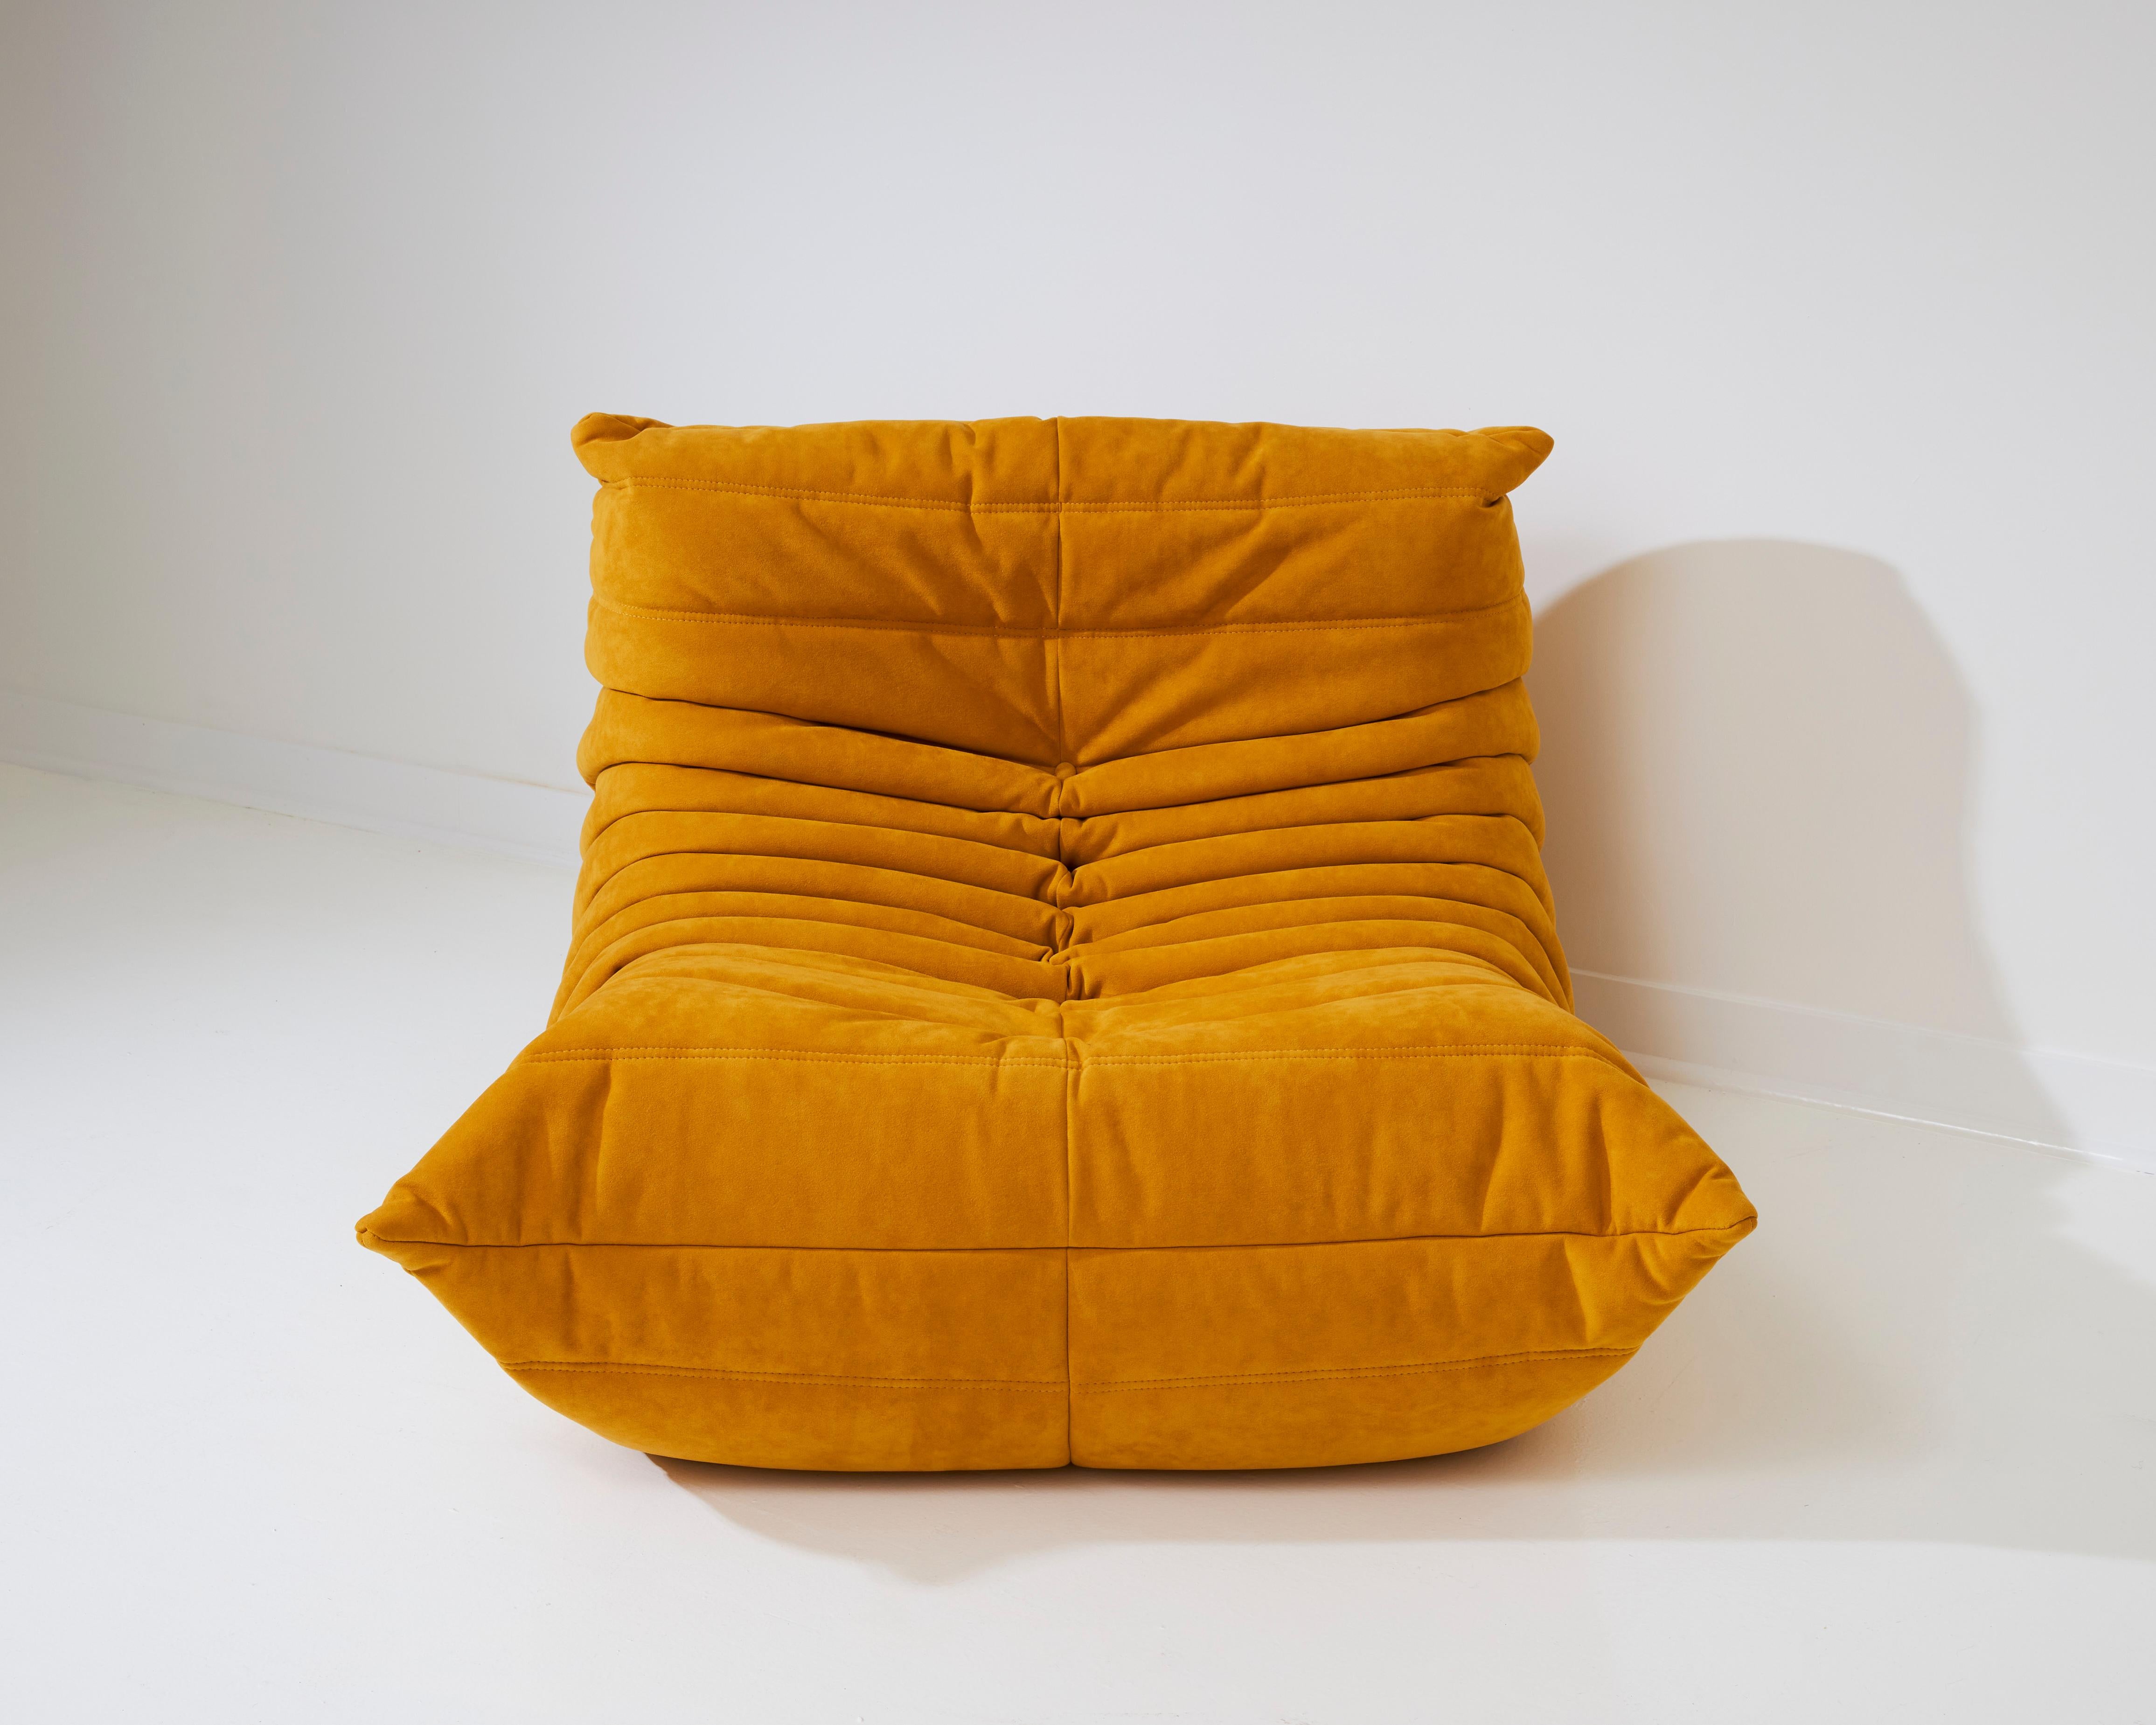 In 1973, Michel Ducaroy created the now-iconic Togo. This collection features all-foam seating with covers generously quilted with polyester. The unique design of the Togo allows it to seamlessly blend into almost any interior, making it one of